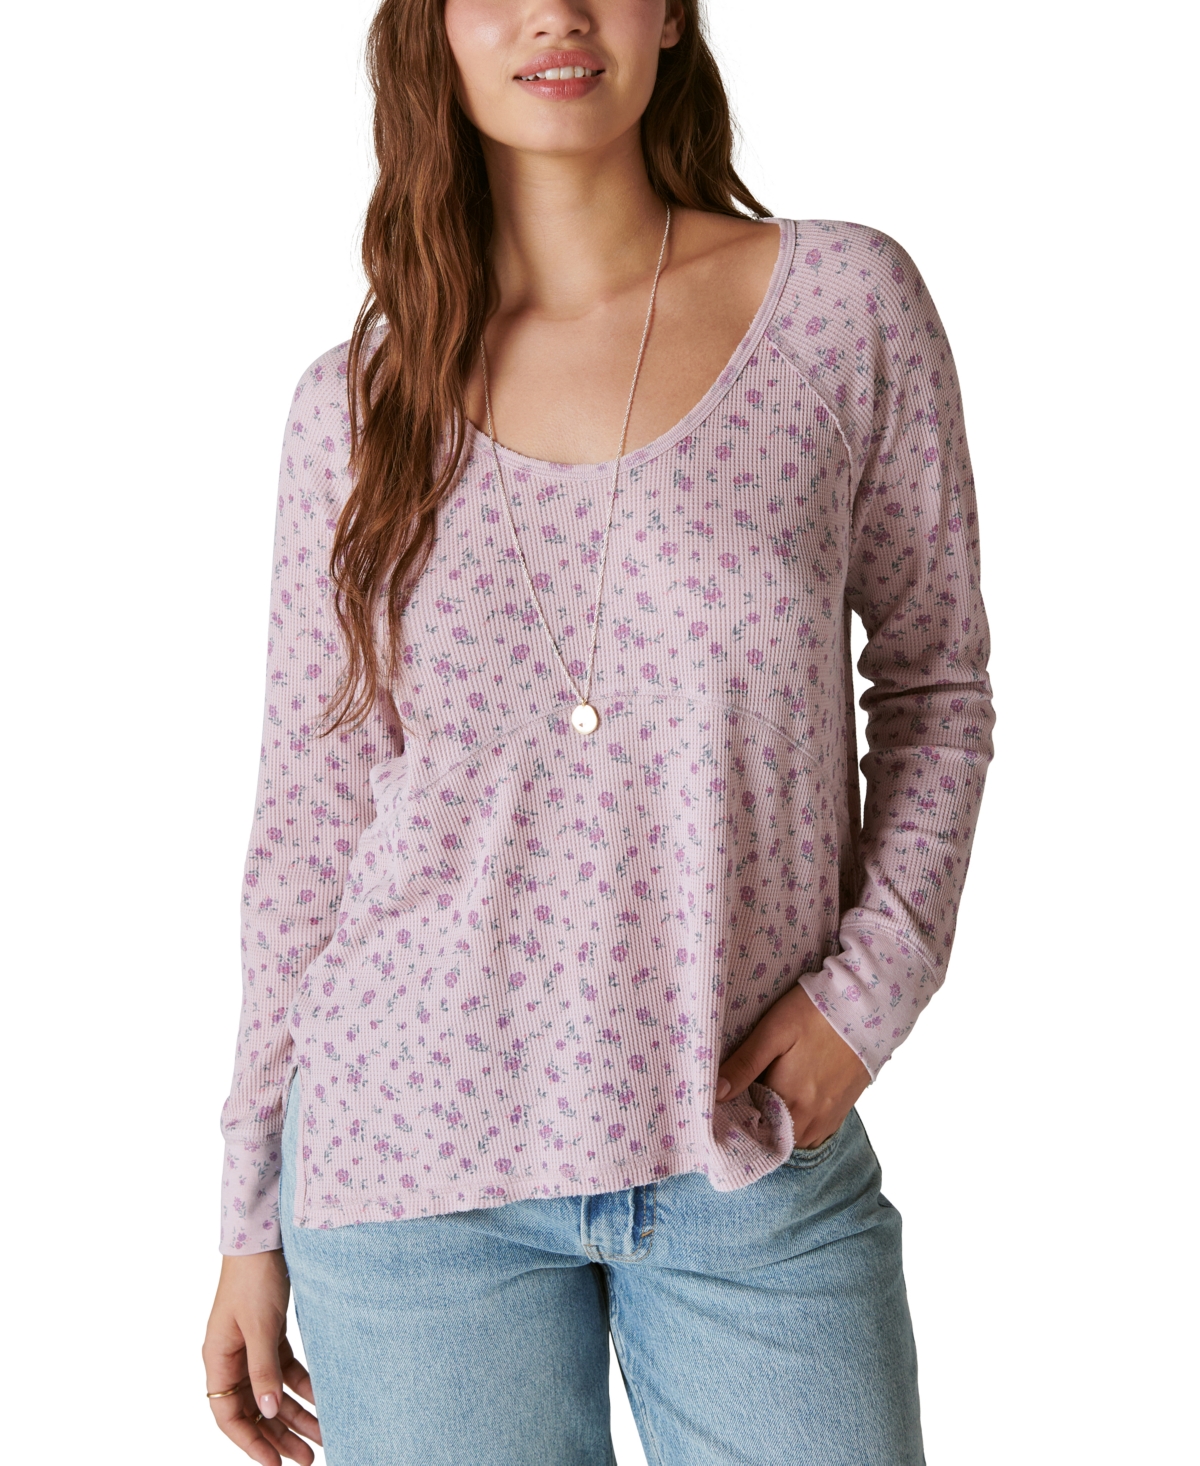 Lucky Brand Oversized V-neck Waffle Thermal Top in Purple